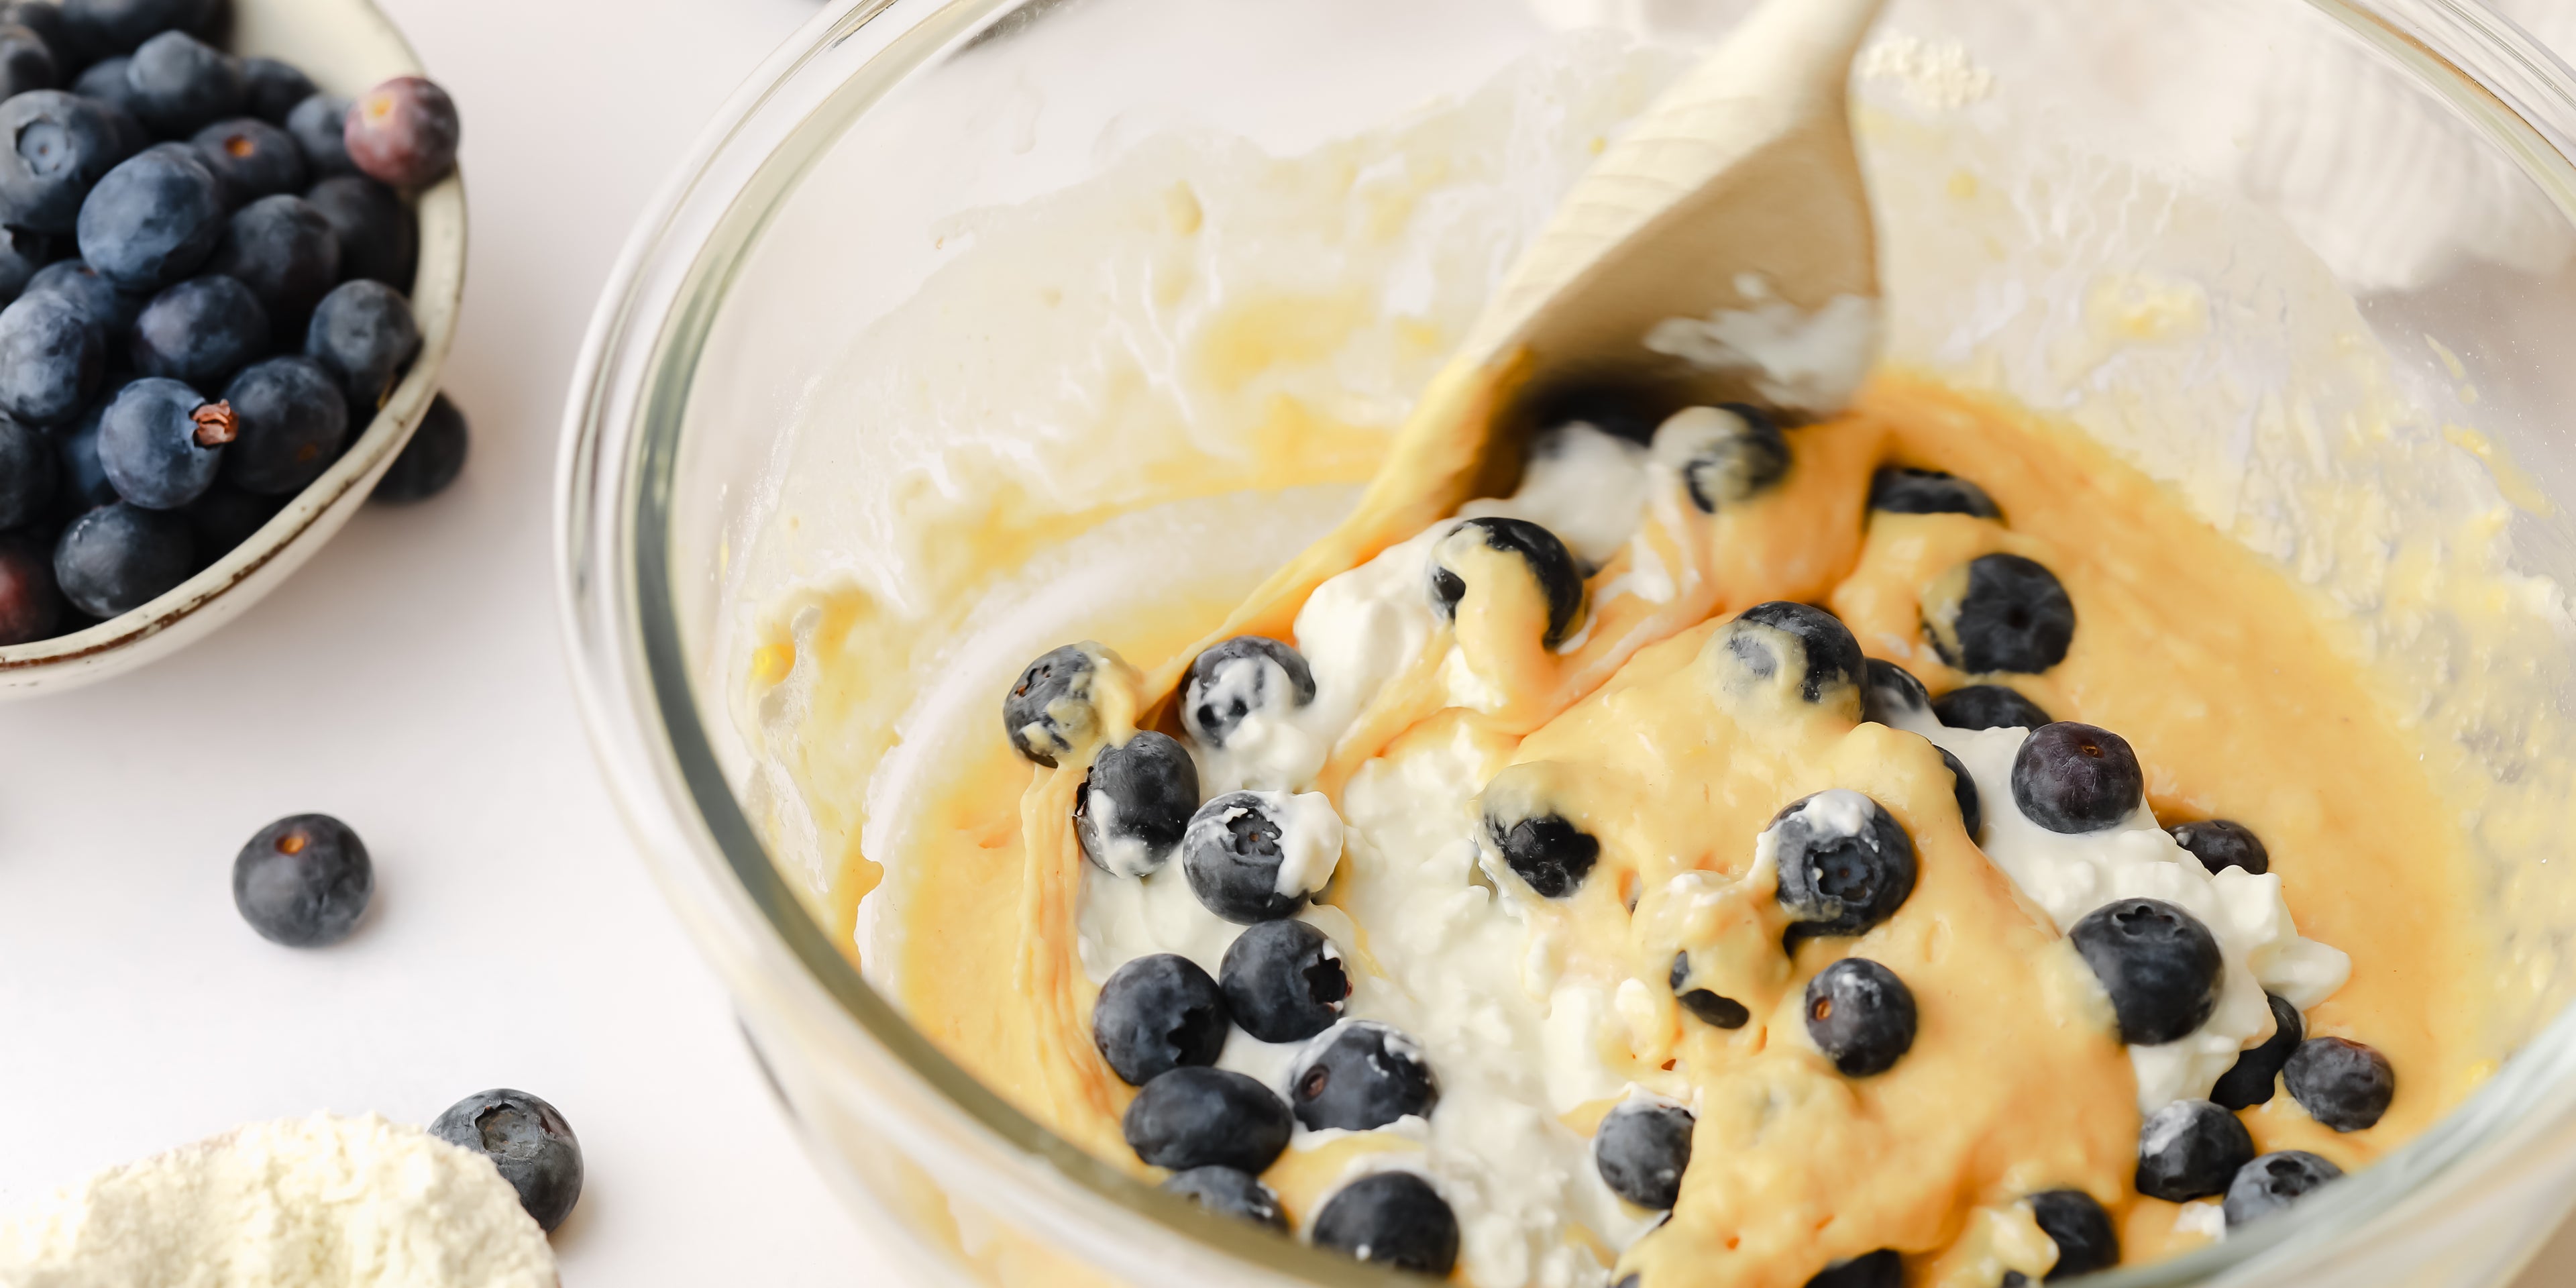 Pancake batter in a mixing bowl with a spoon and blueberries